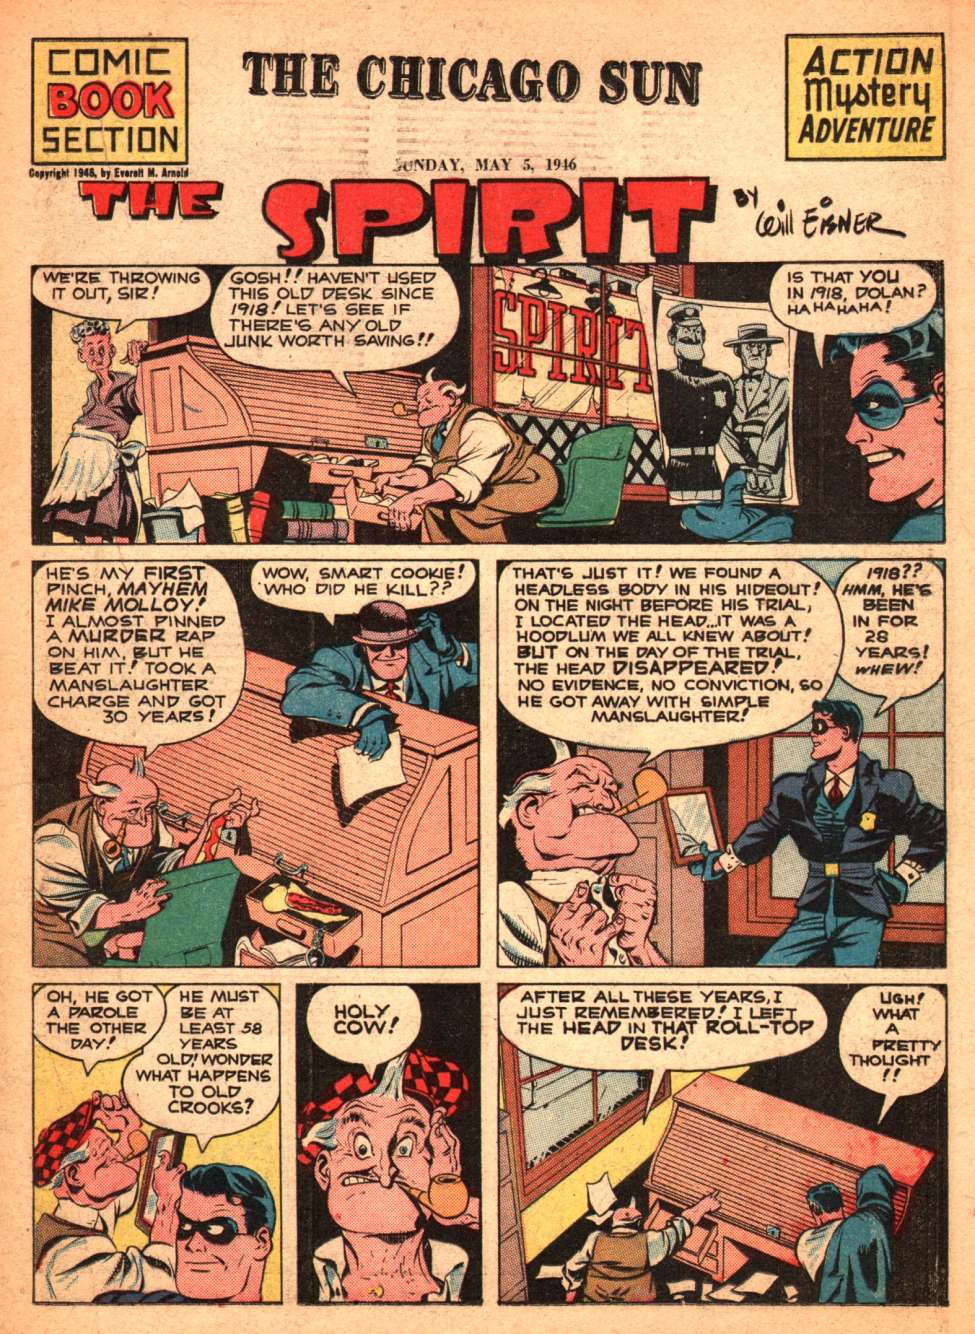 Book Cover For The Spirit (1946-05-05) - Chicago Sun